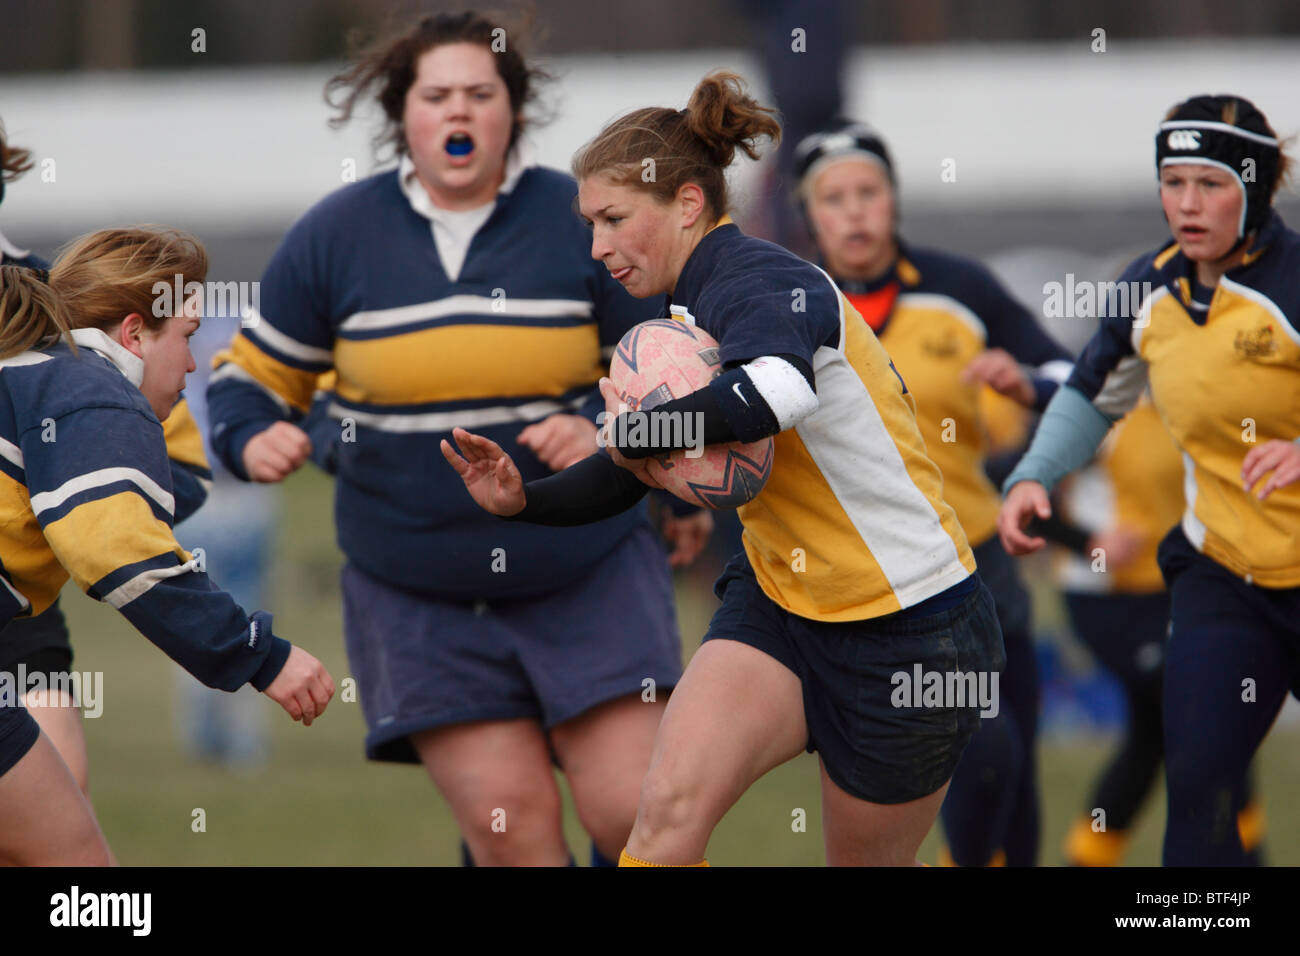 A Naval Academy player carries the ball during a women's rugby match against George Washington University. Stock Photo